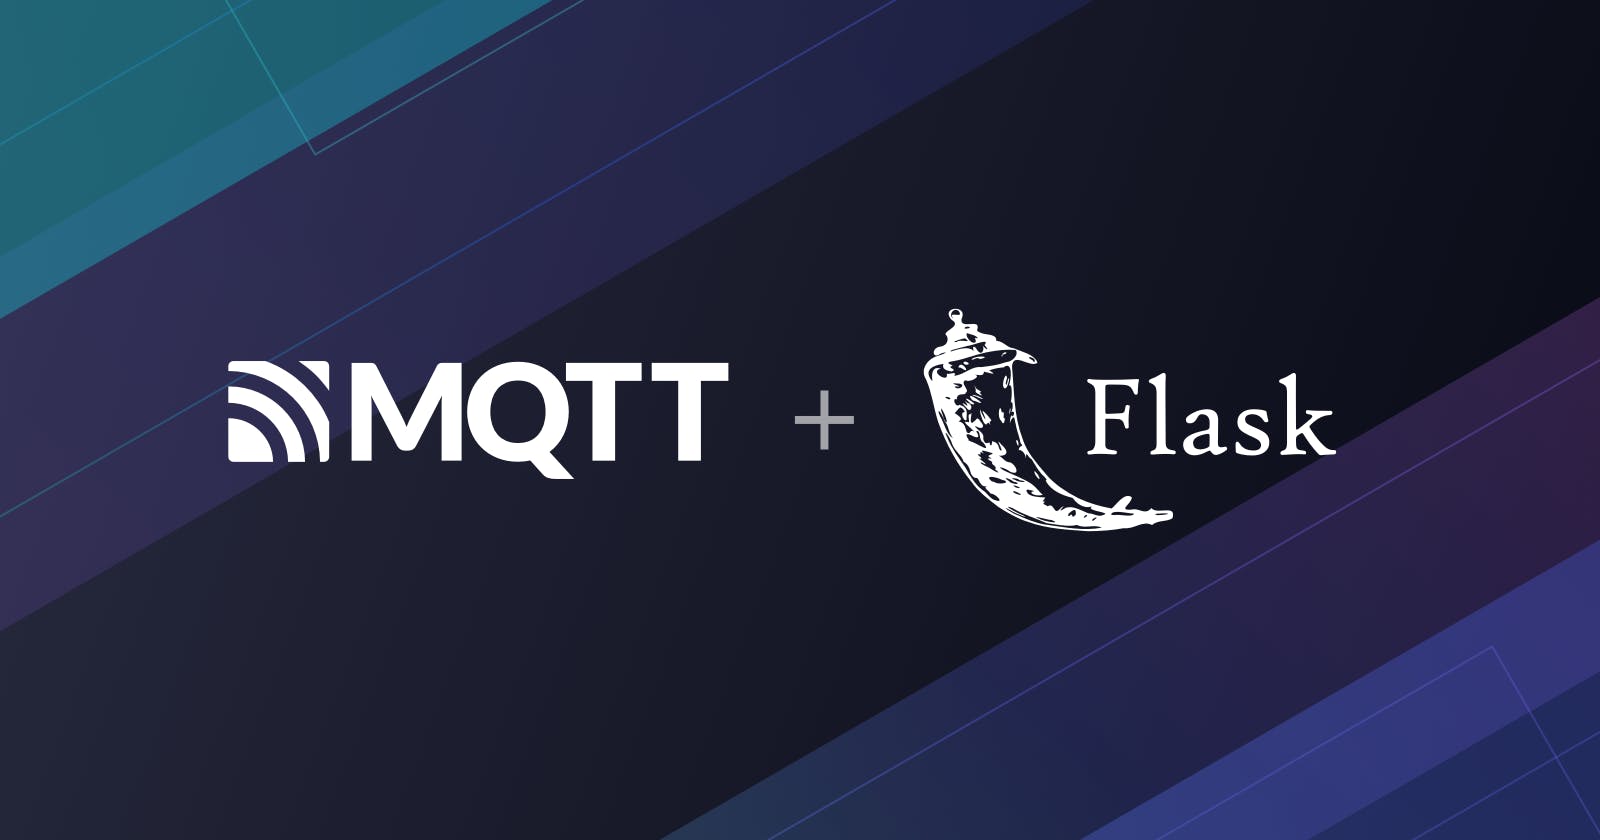 How to Use MQTT in Flask